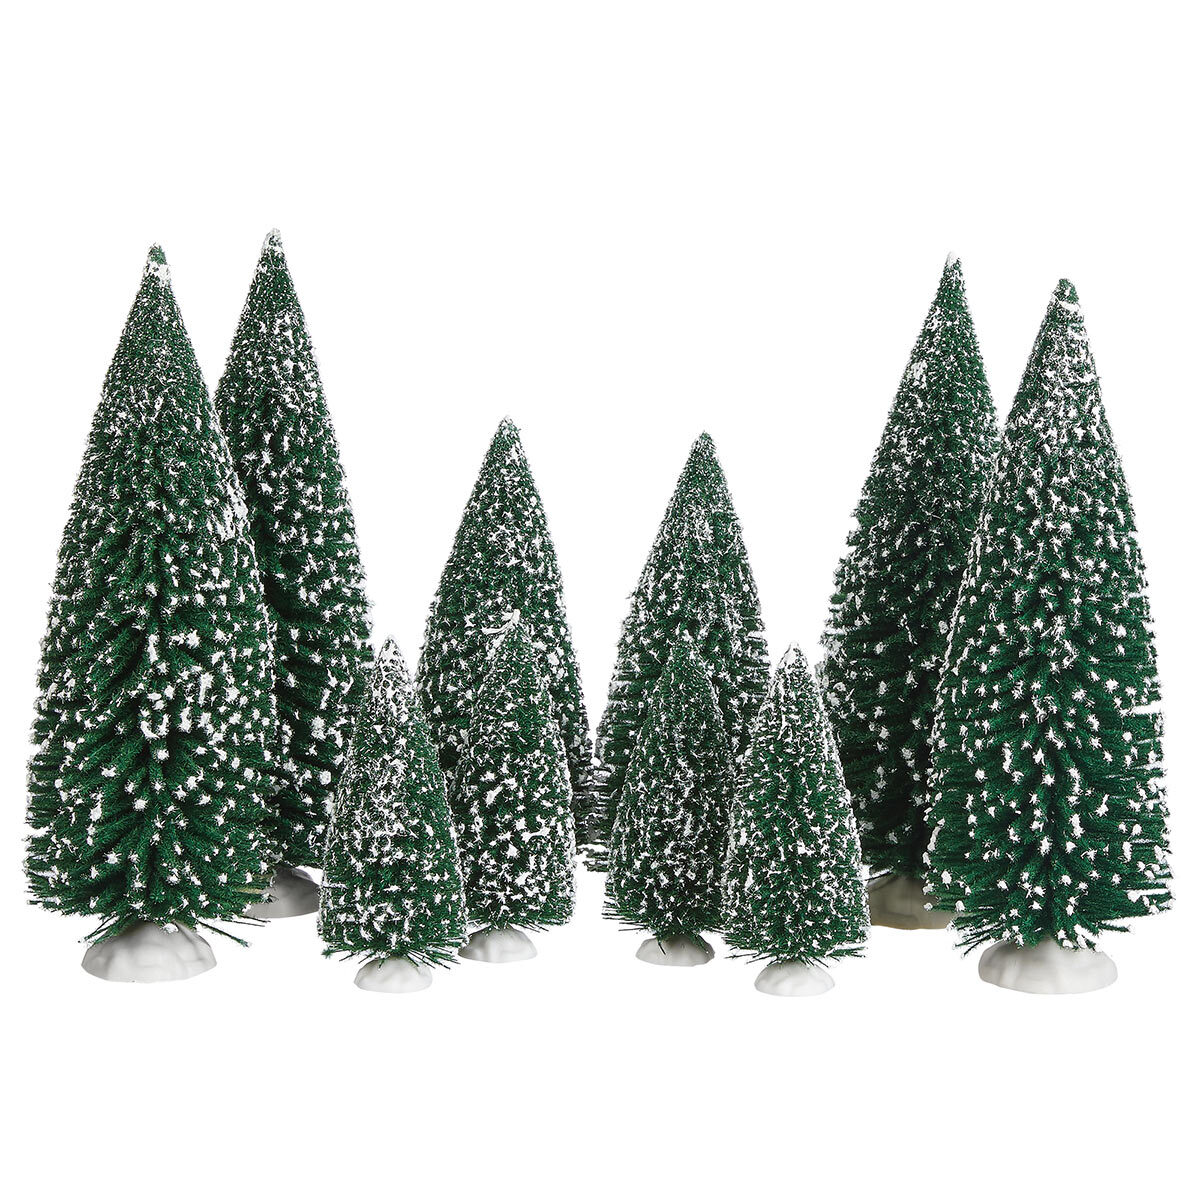 Buy Christmas Holiday Village 30 Pieces Trees Image at Costco.co.uk